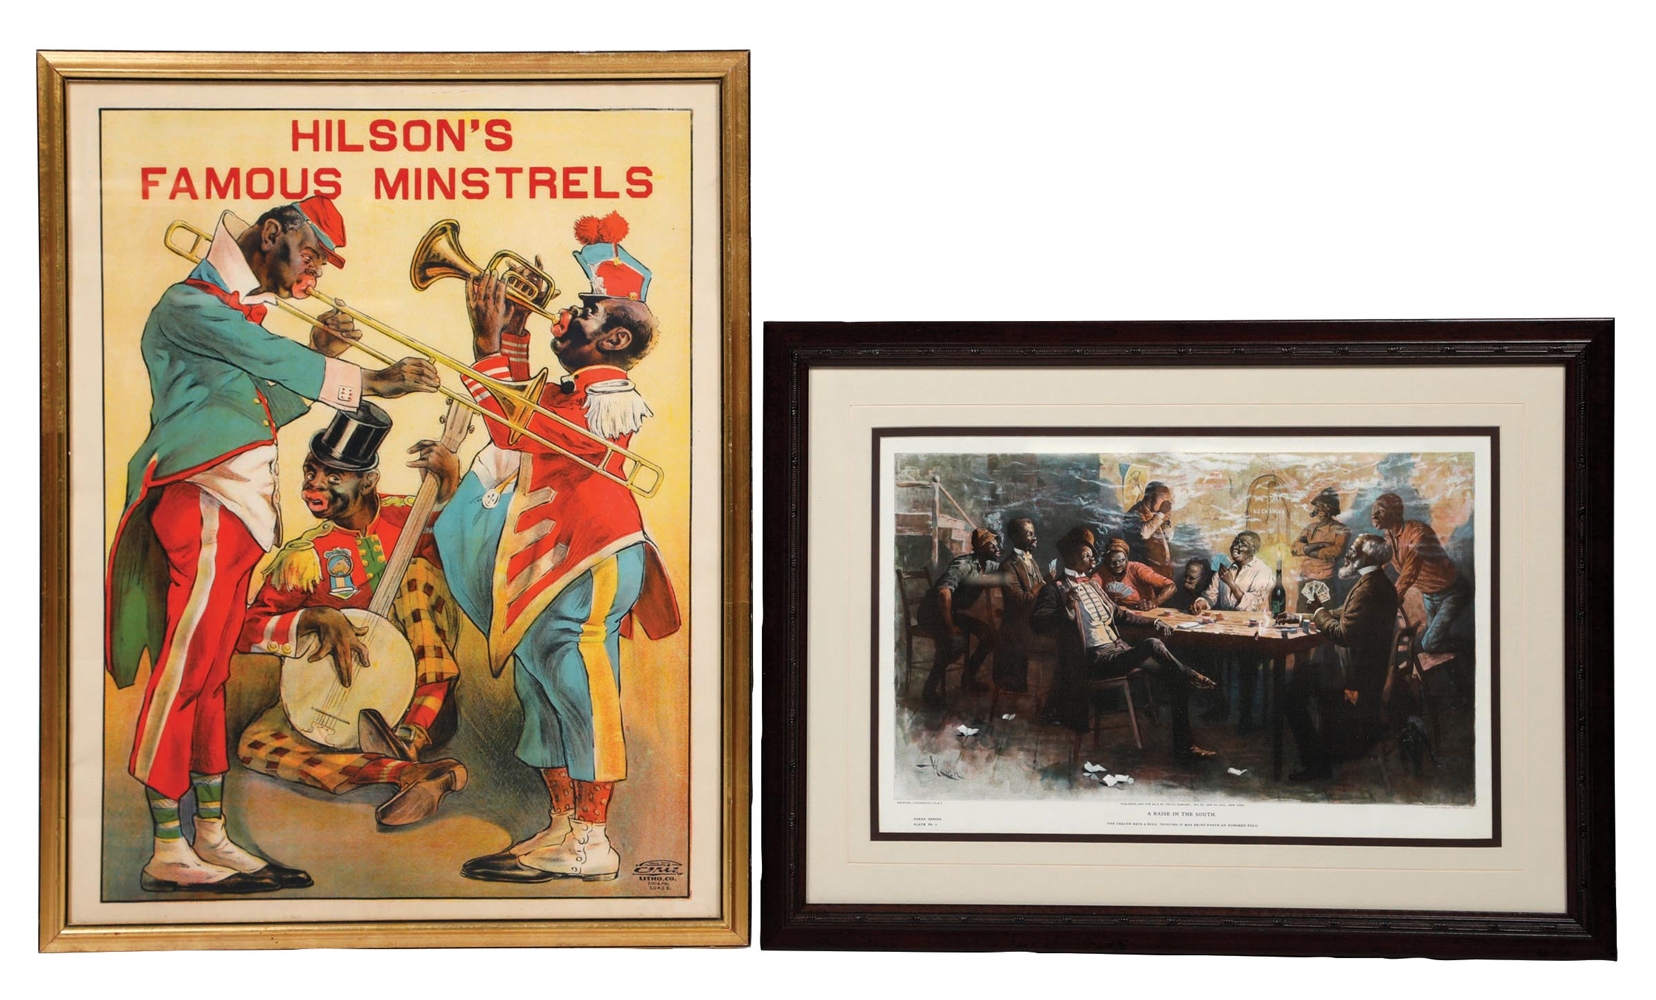 COLLECTION OF 2 PAPER LITHOGRAPHS W/ BLACK AMERICANA GRAPHICS